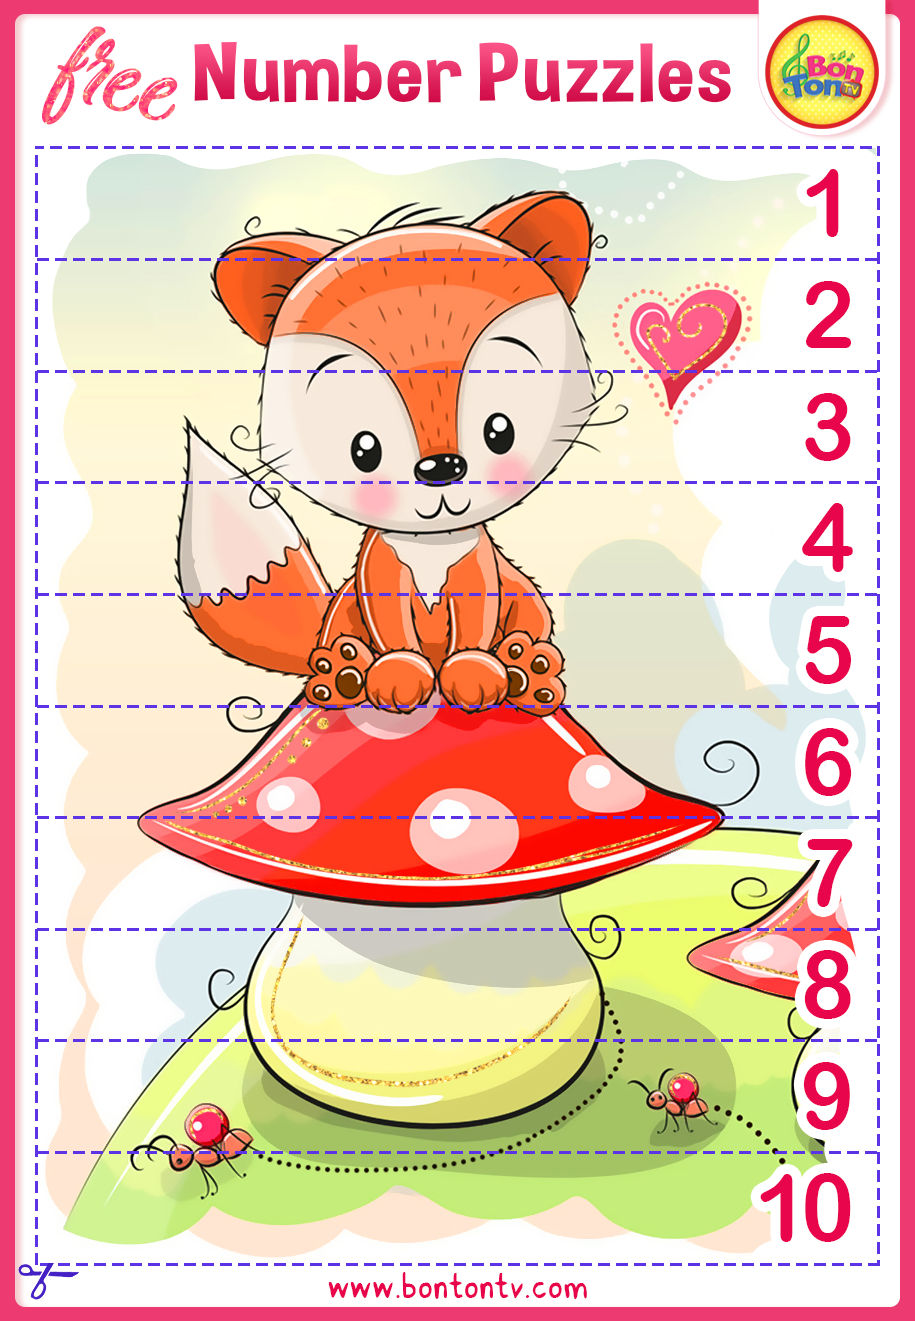 Number Puzzles - Free Preschool Printables For Kids - Bontontv - Printable Puzzles For Preschoolers